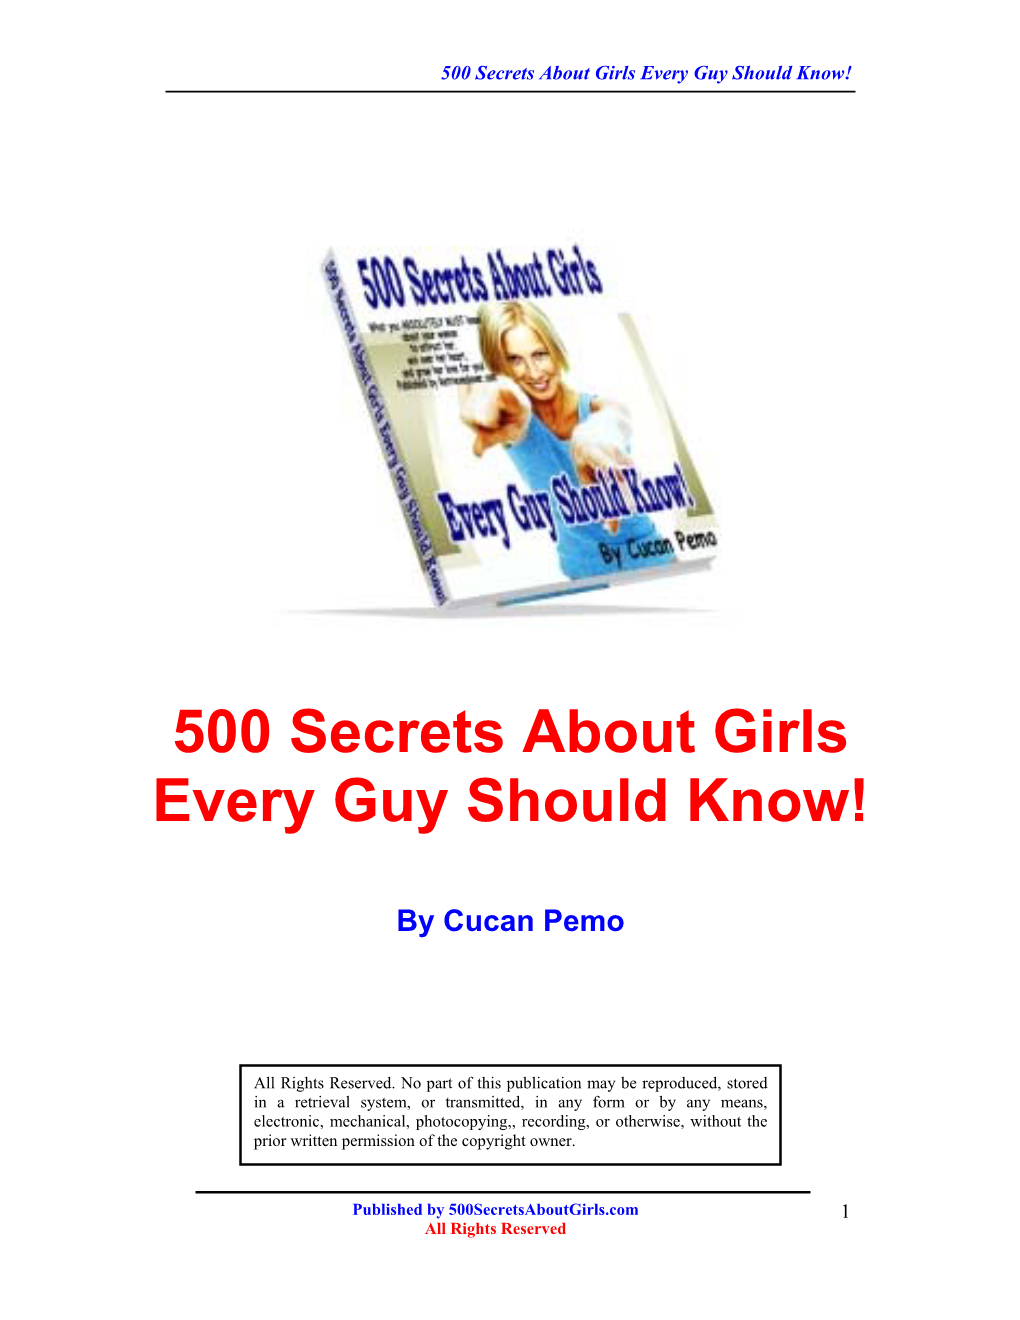 500 Secrets About Girls Every Guy Should Know!